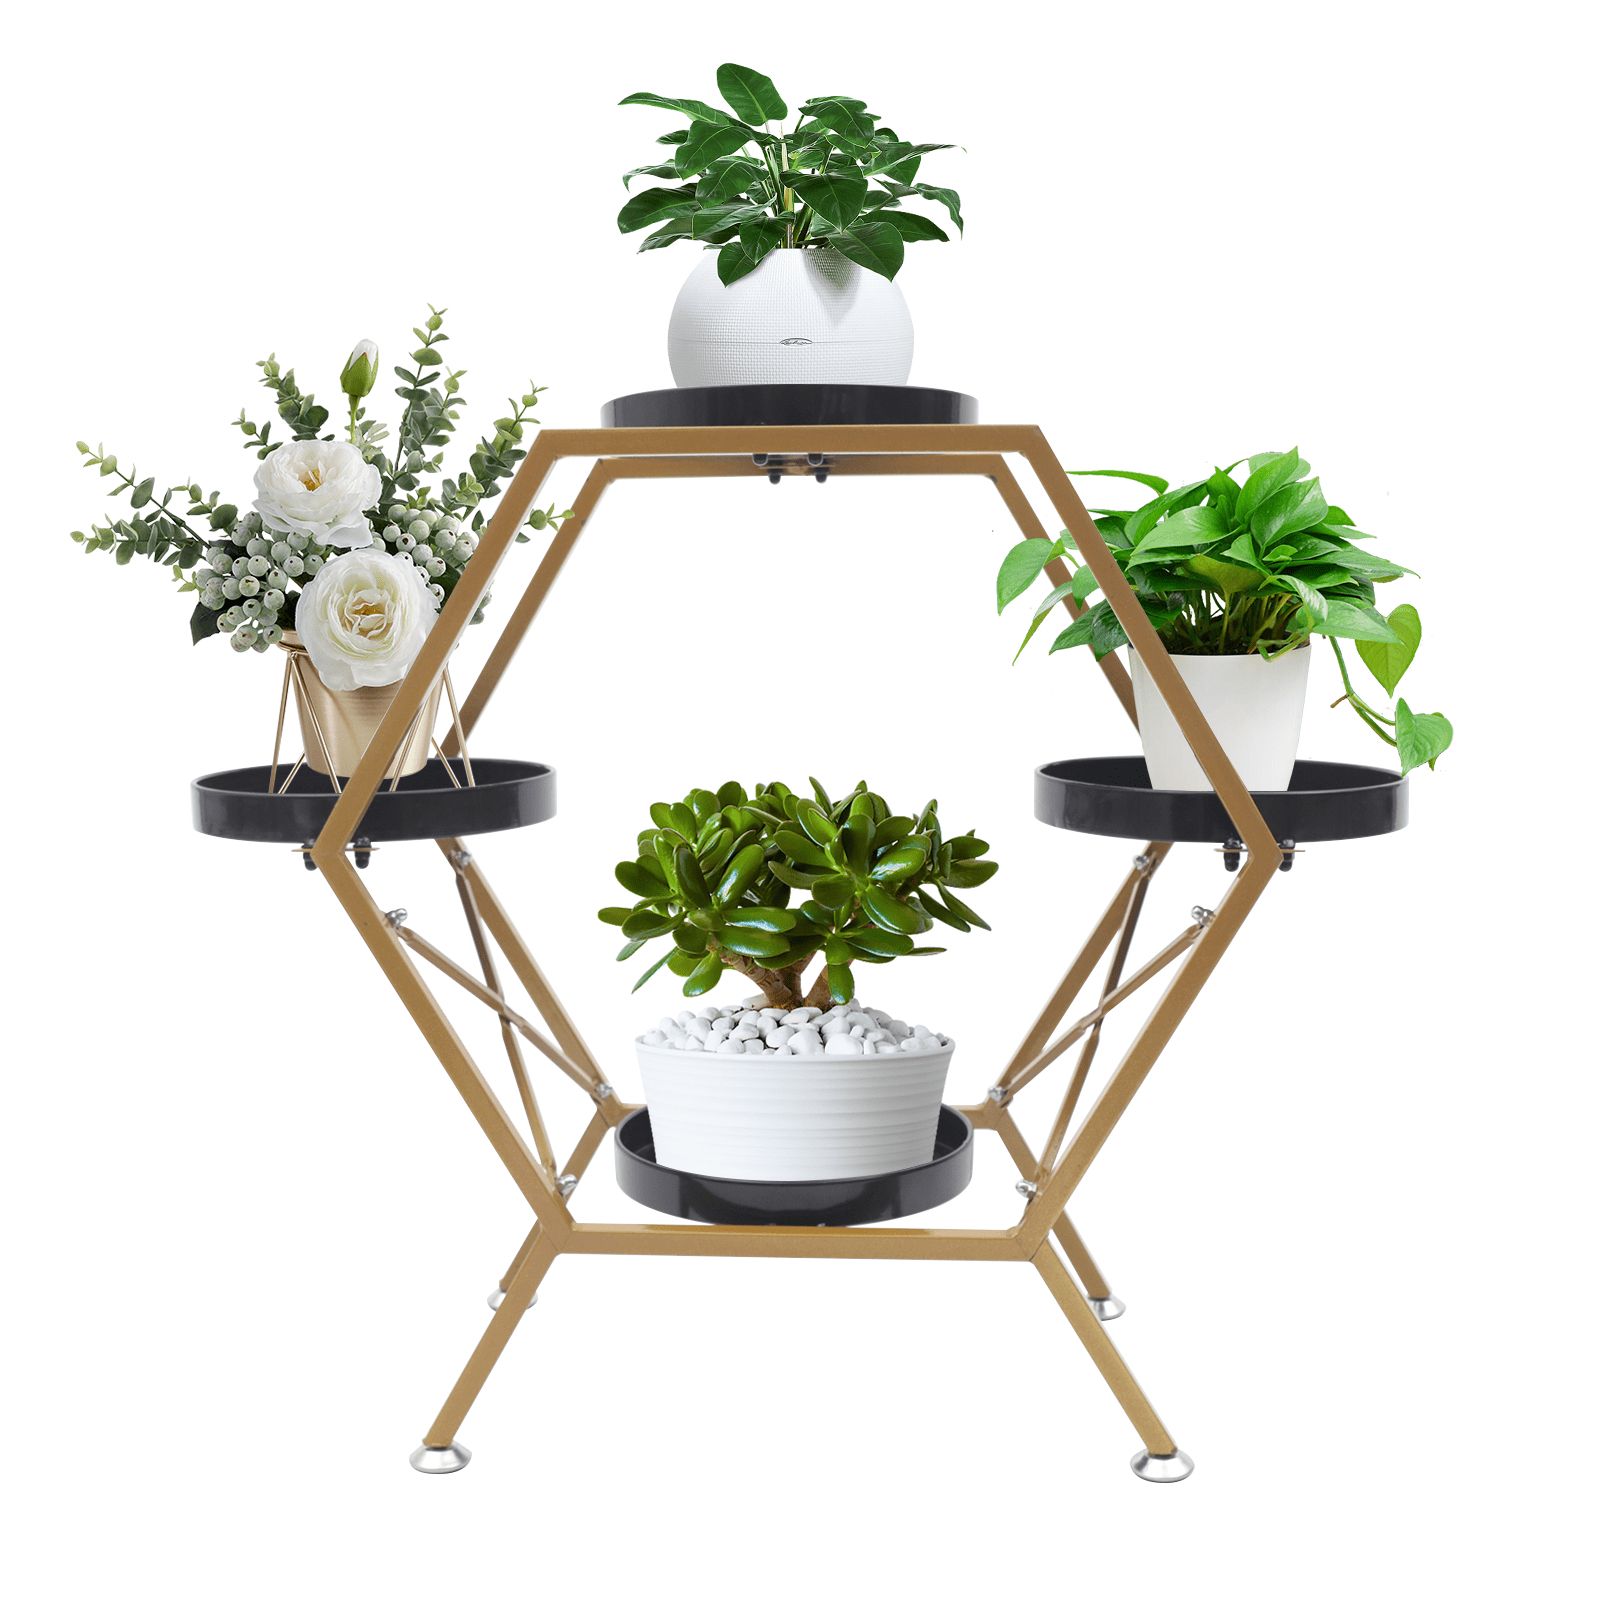 Ethedeal Hexagon Gold Metal Plant Stand 4 Trays Flower Pot Holder Display  Garden Balcony – Walmart For Hexagon Plant Stands (View 2 of 15)